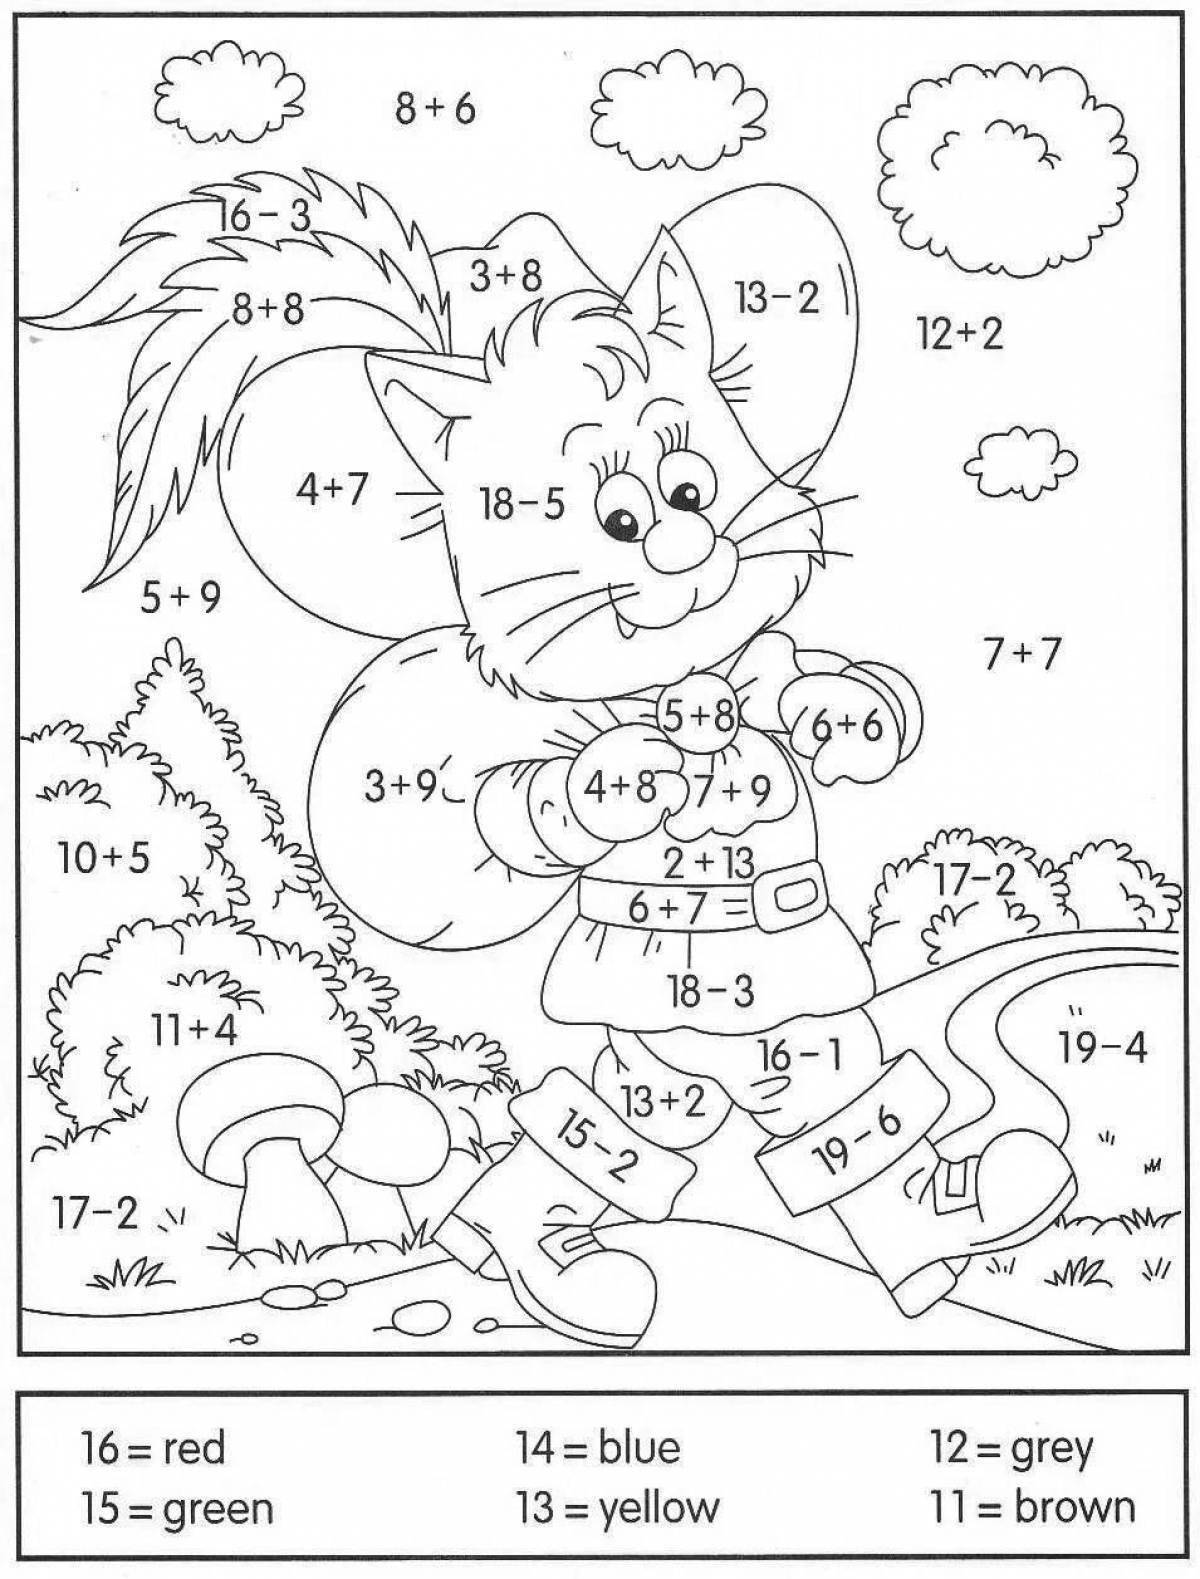 Examples of coloring books for babies